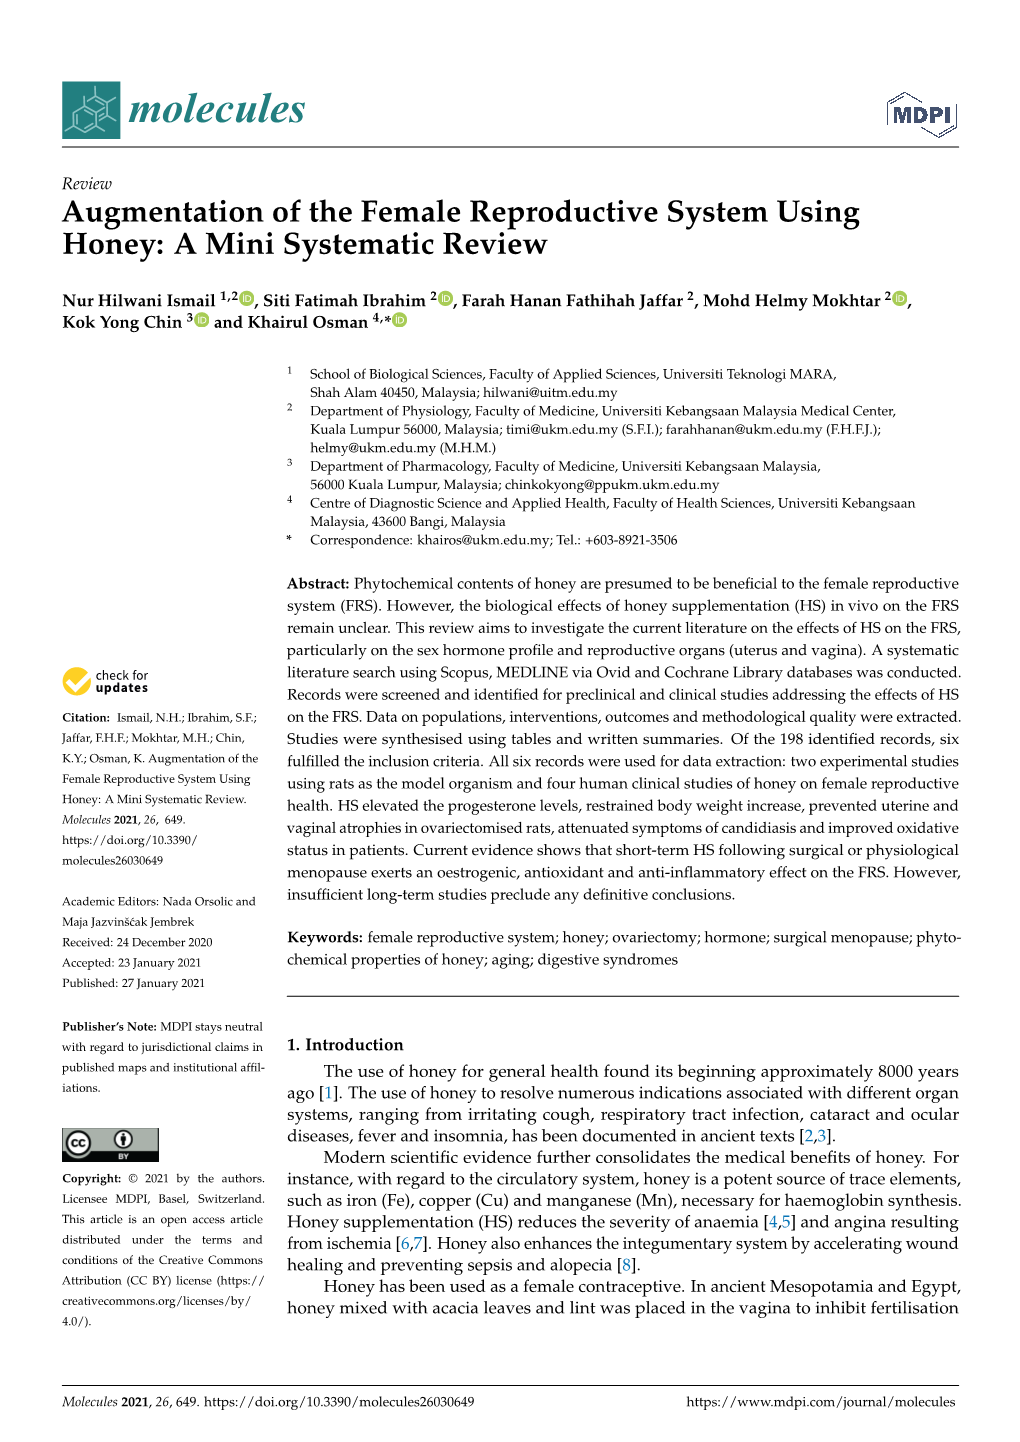 Augmentation of the Female Reproductive System Using Honey: a Mini Systematic Review